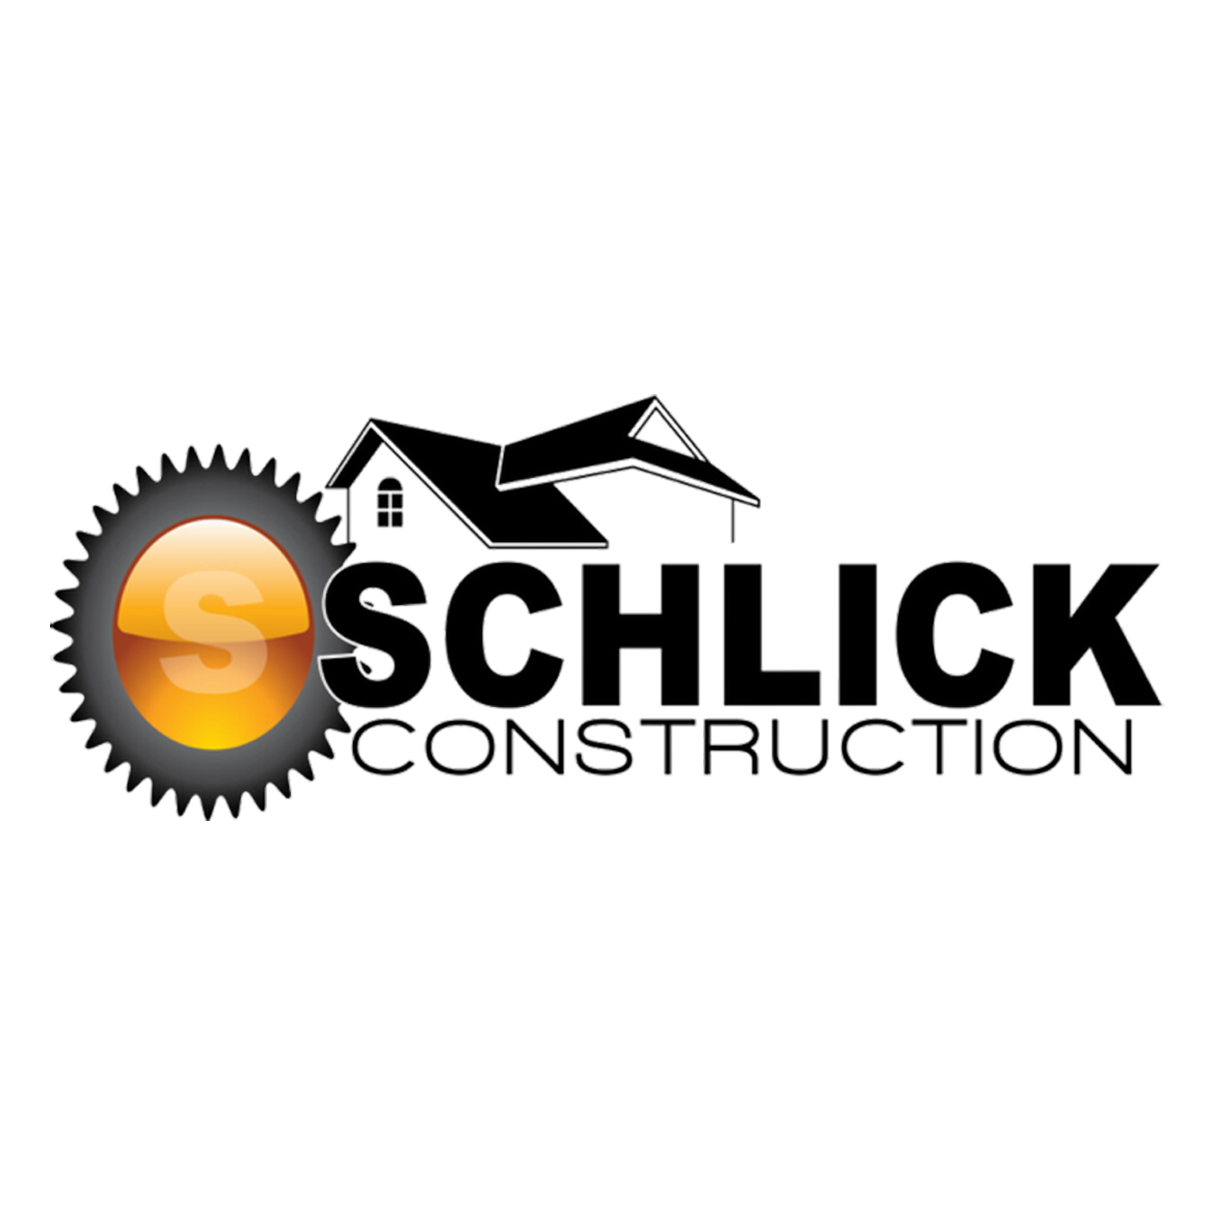 Timber Creek Virtual providing Lead Generation Services for Schlick Construction